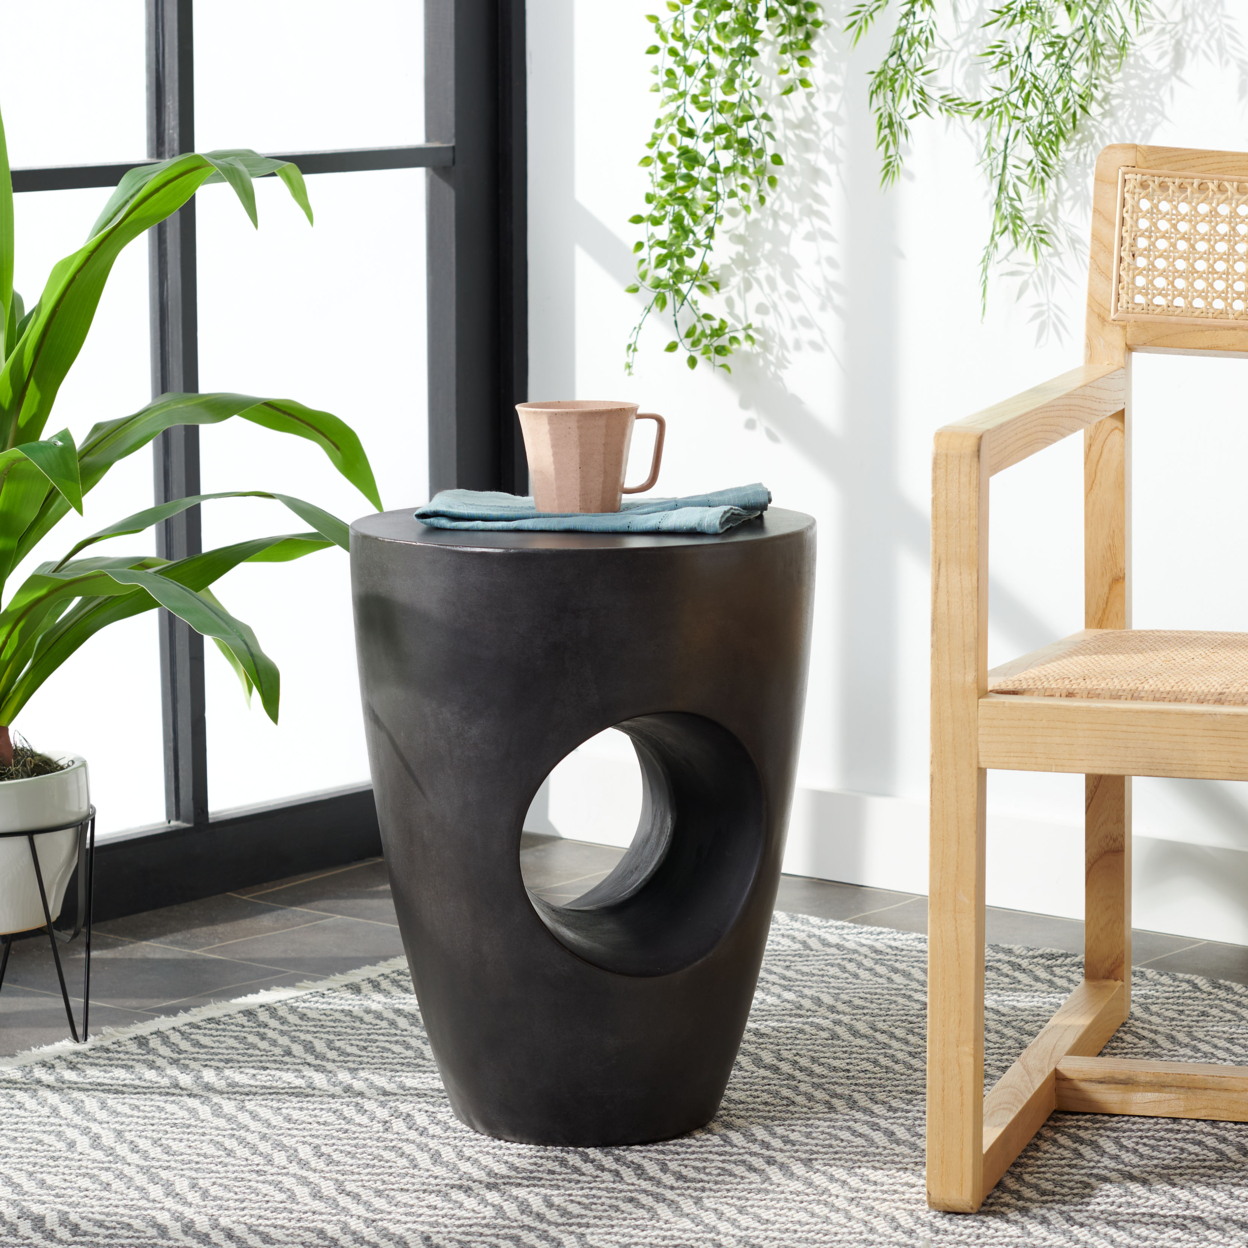 SAFAVIEH Outdoor Collection Aishi Concrete Accent Stool Black